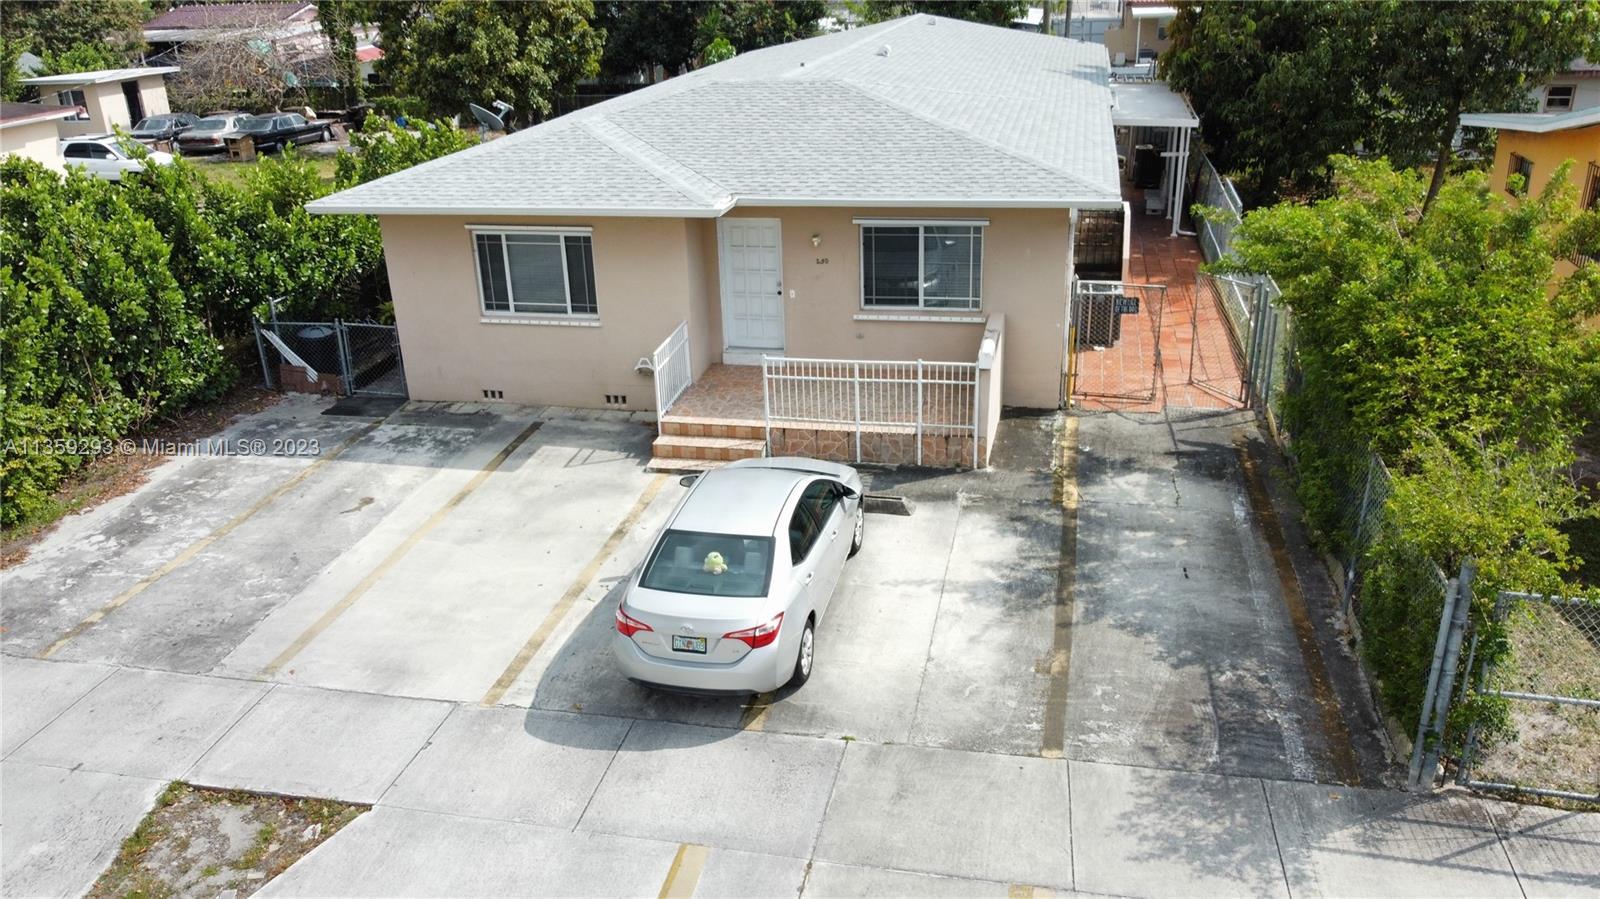 Spacious single-family home located in Hialeah Acres.  This income producing property includes a 3/2, 2/1 and 1/1.  Large lot with plenty of parking.  Owner is currently occupying the 3/2.  Call today to schedule an appointment.